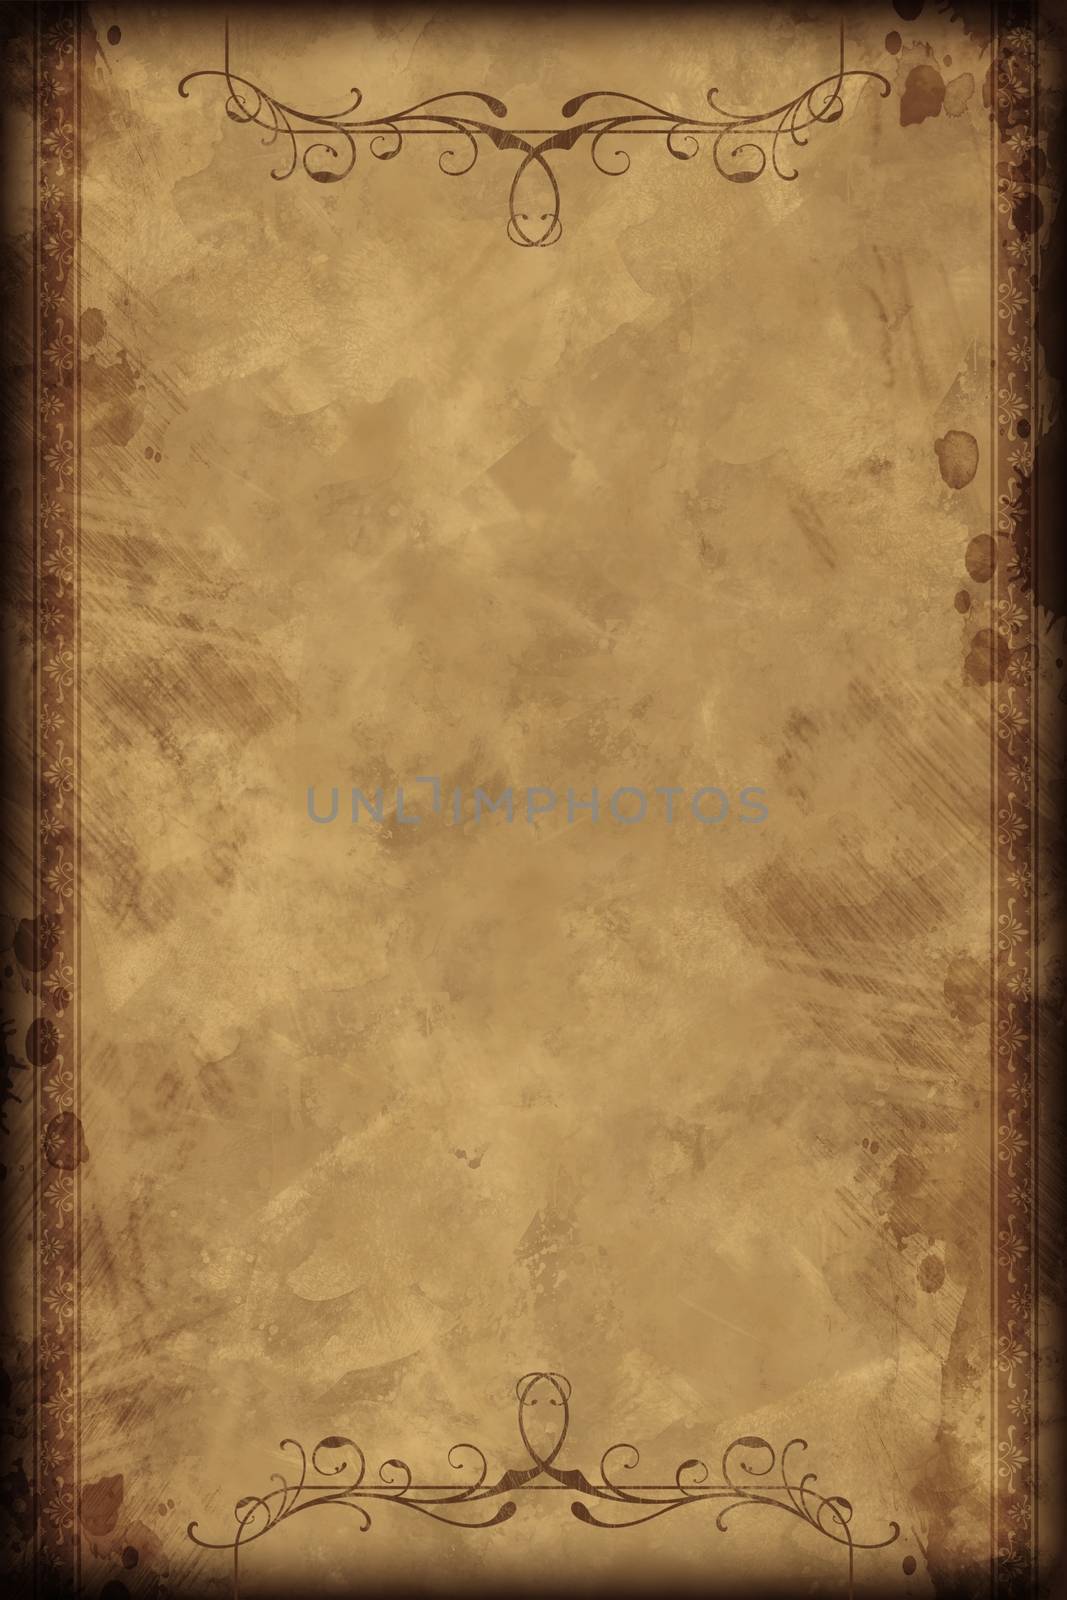 Old Vintage Background - Vertical Design. Old-Fashioned Browny Paper Background with Decorative Floral Elements on Top and Bottom.